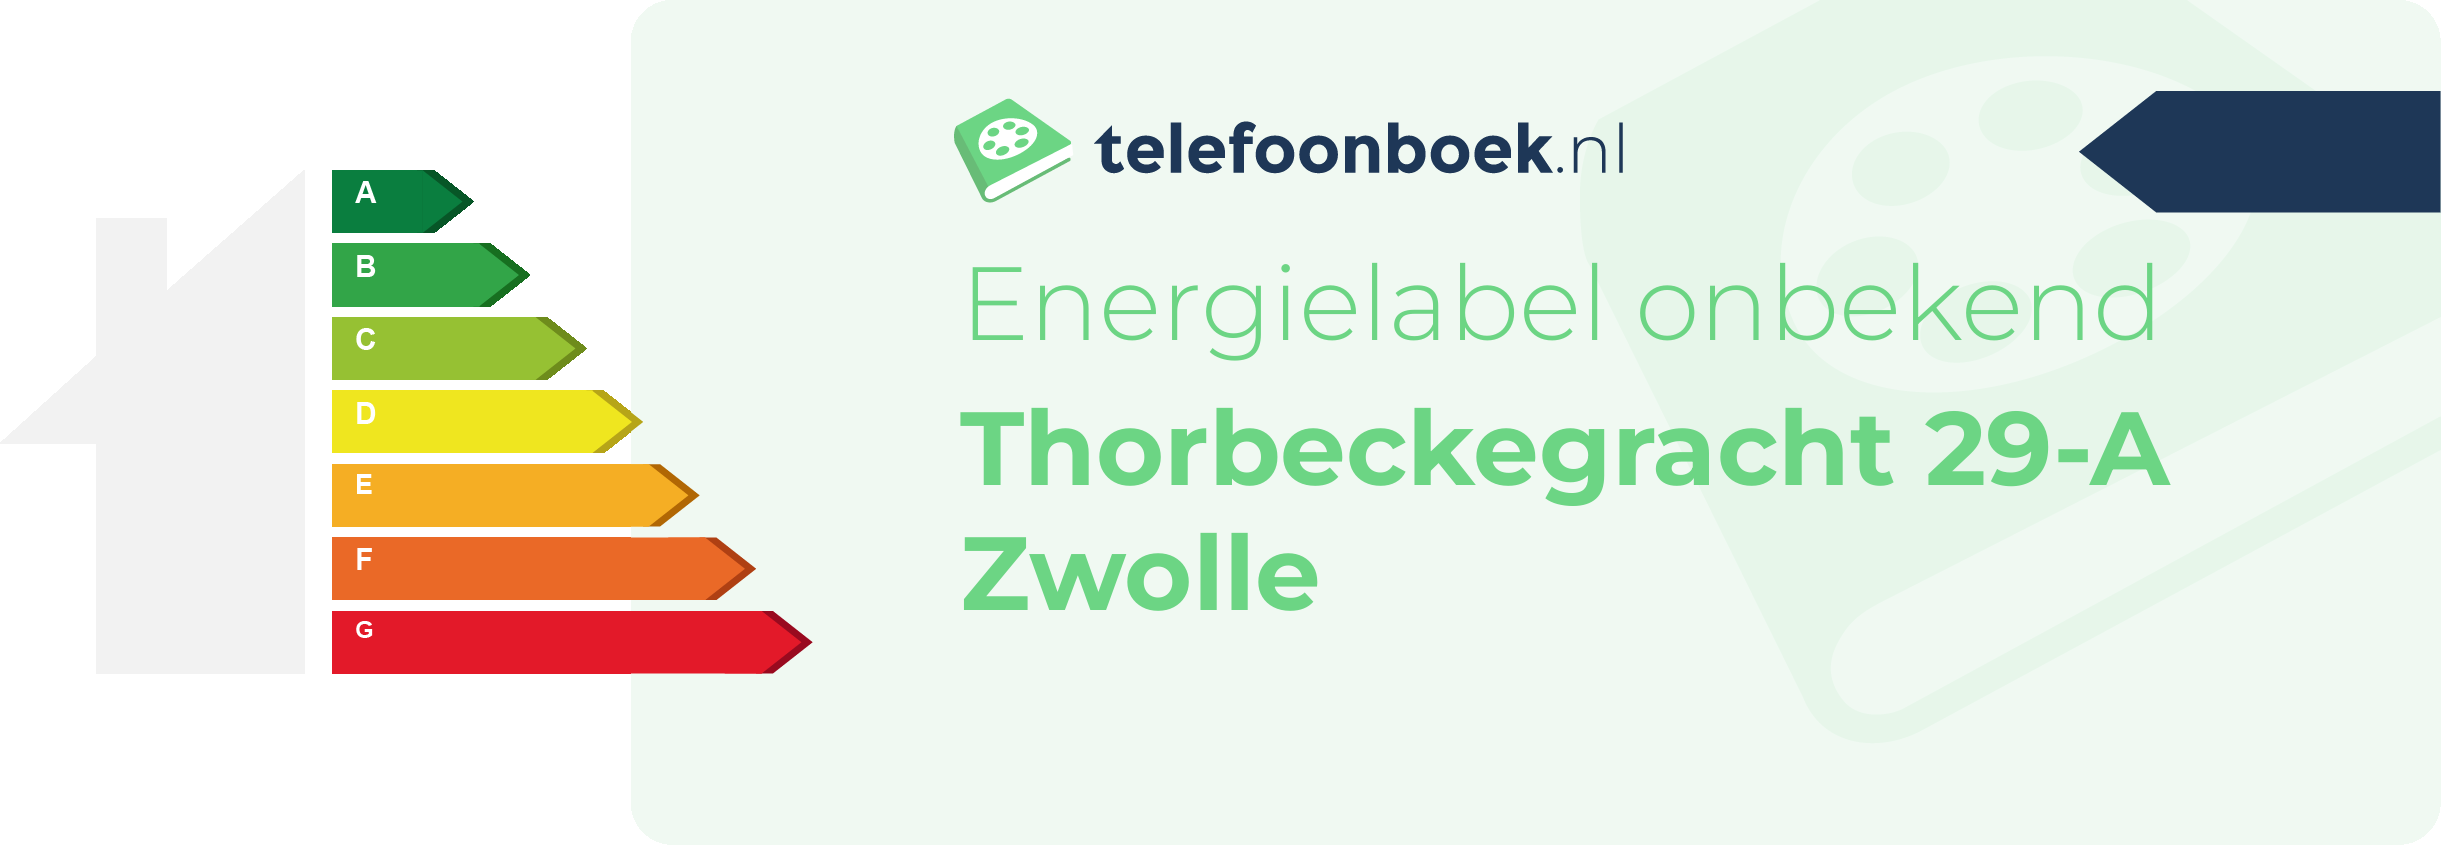 Energielabel Thorbeckegracht 29-A Zwolle